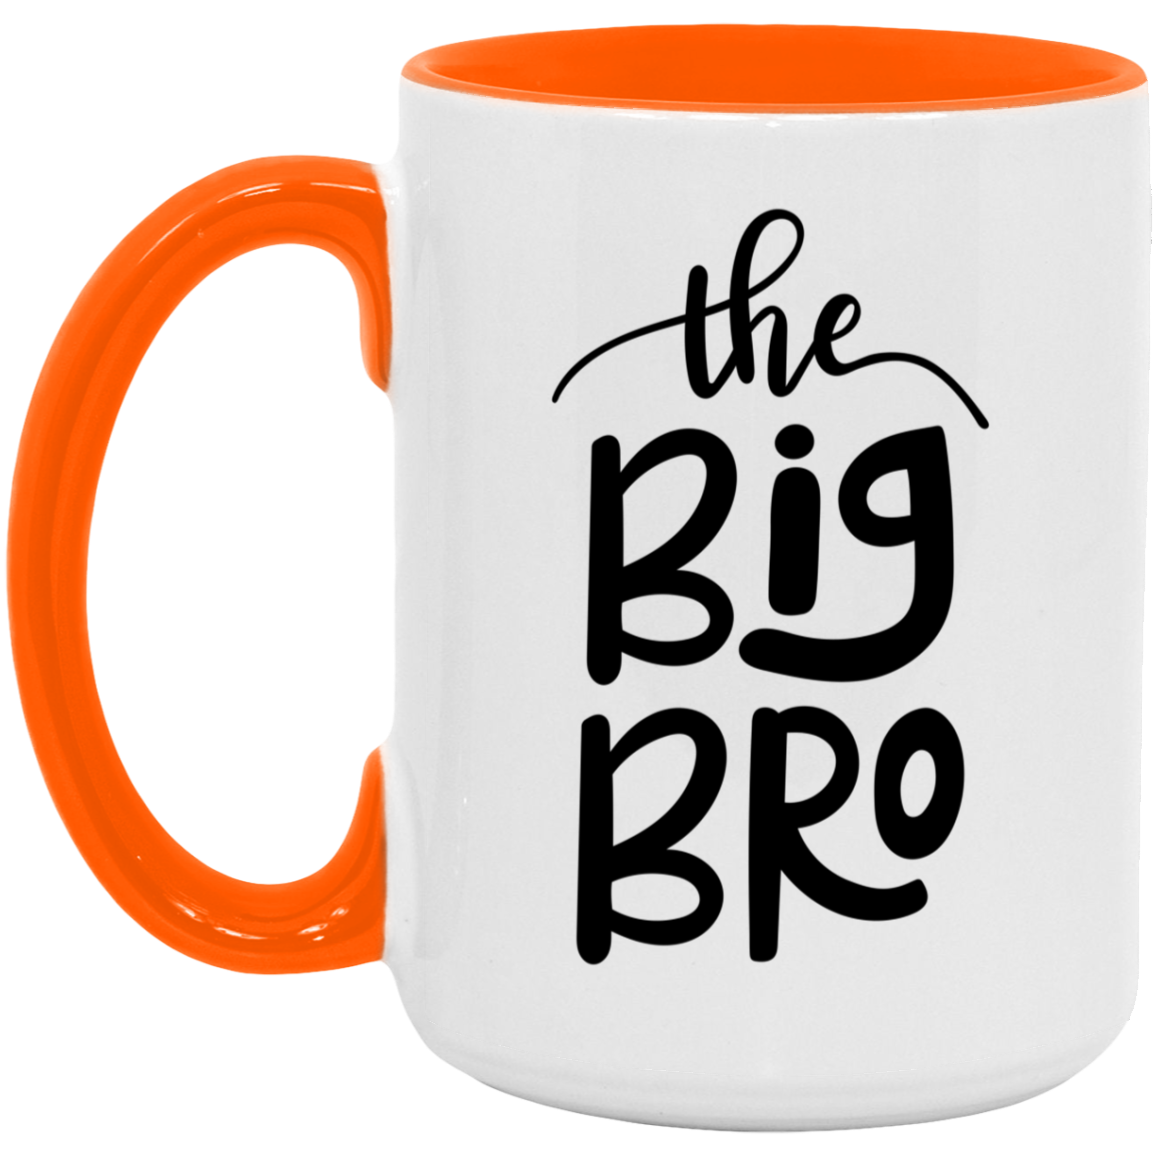 Big Bro Mug - Gift For Brother From Sister or Brother